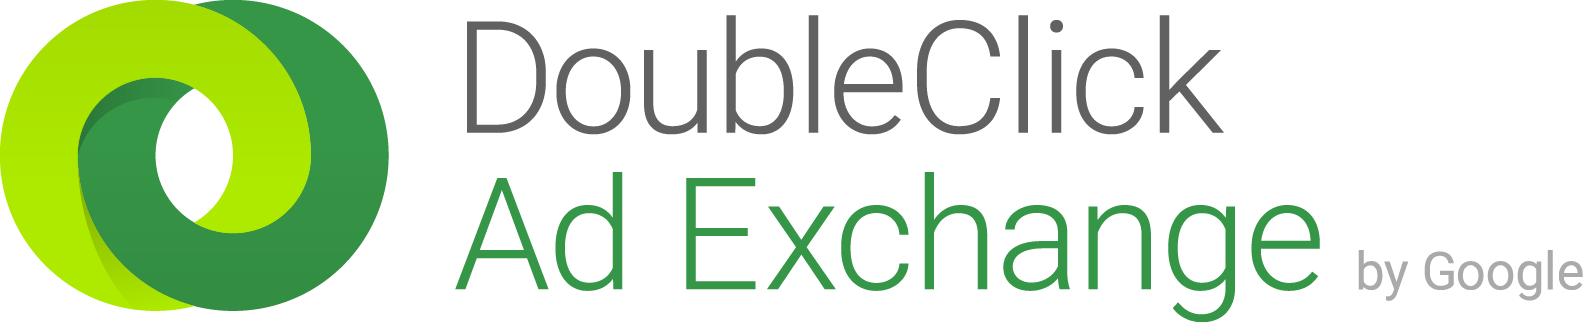 Google-DoubleClick-Ad-Exchange-logo.png